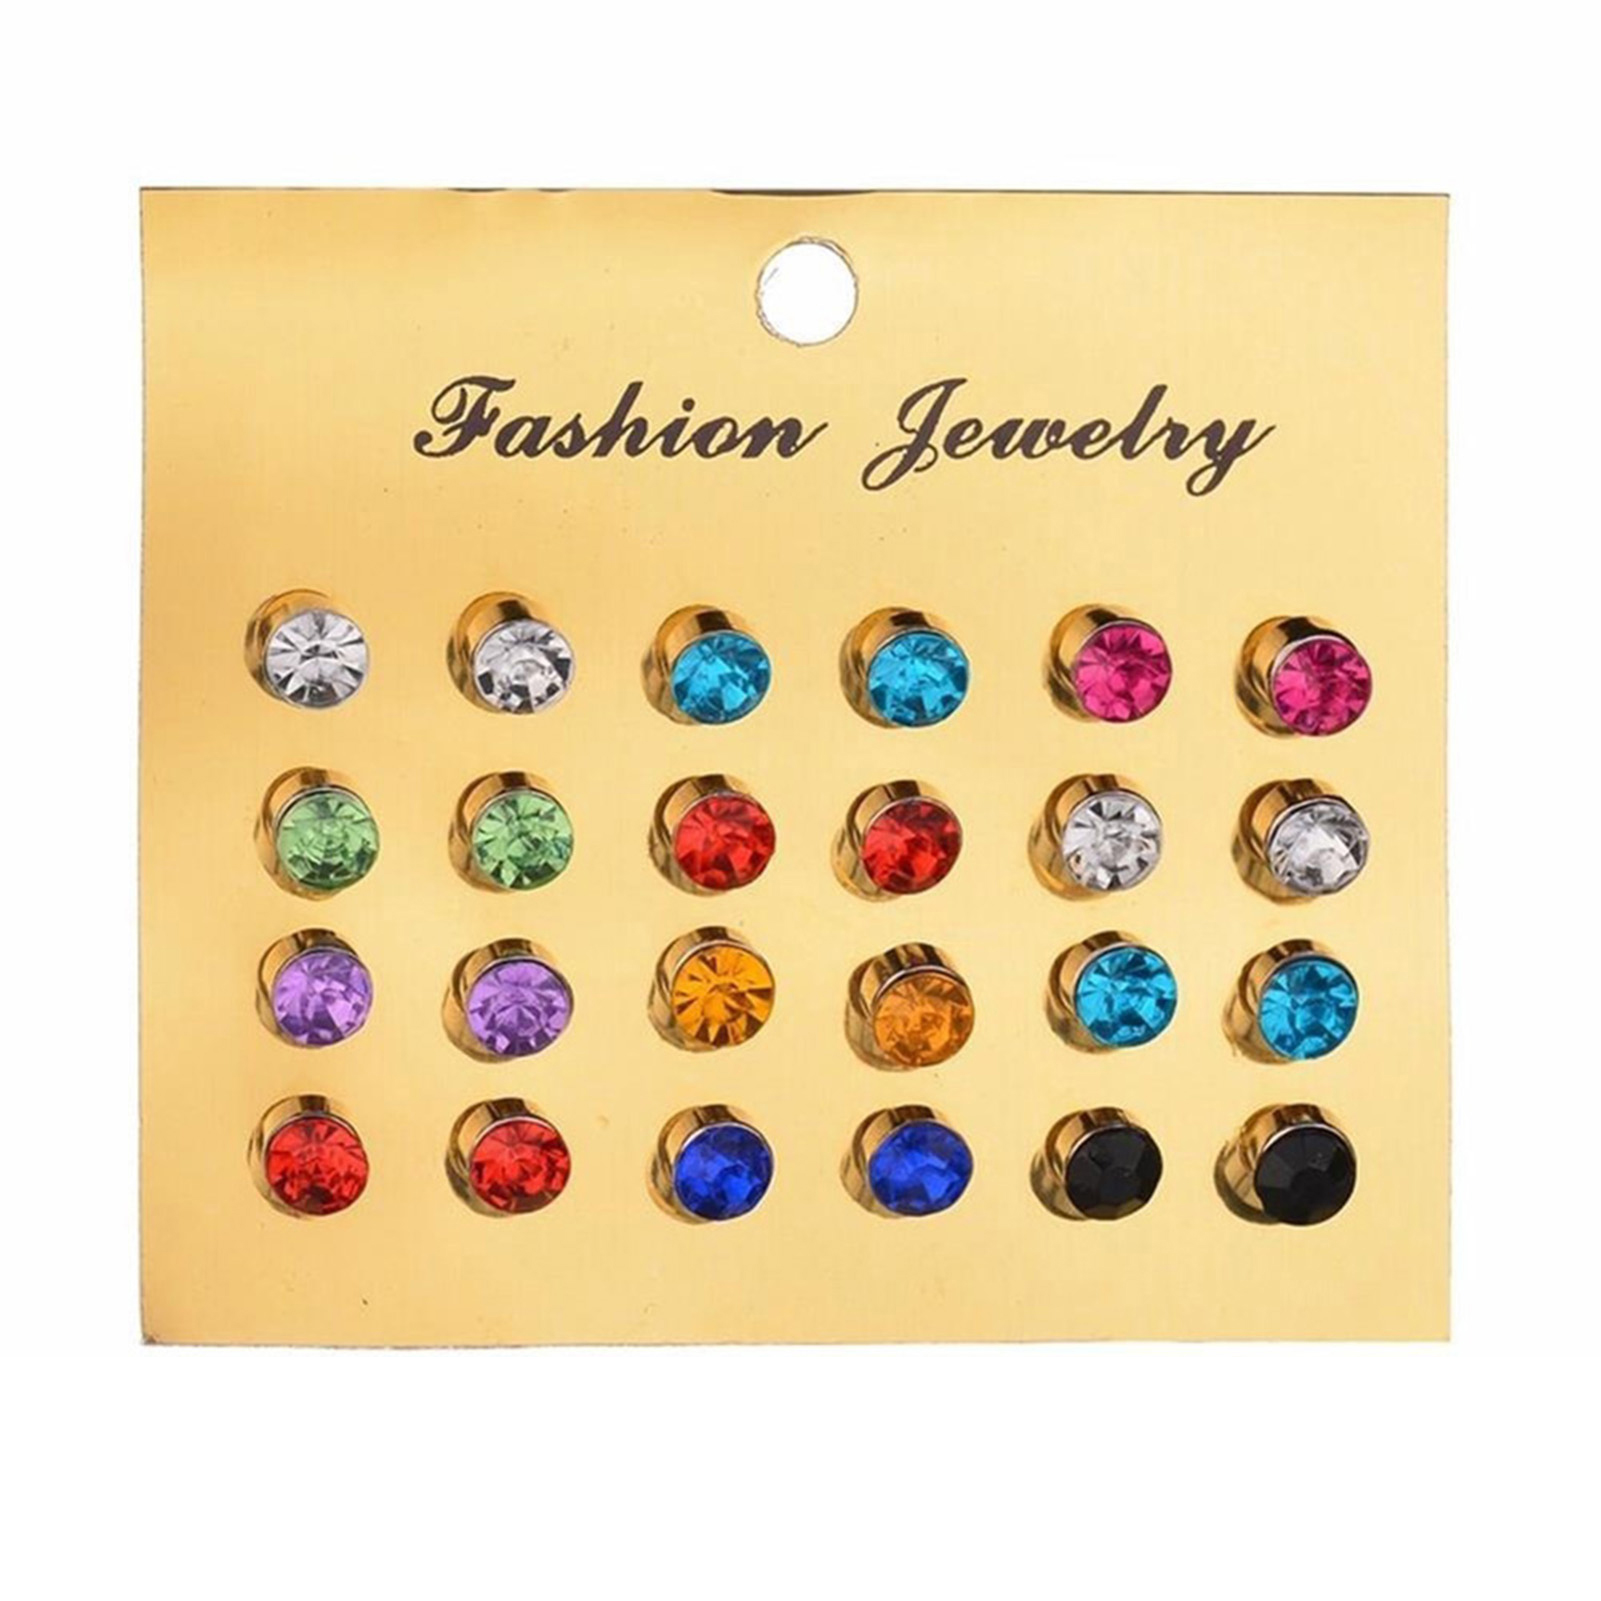 Naierhg 12Pcs/Set Earrings Nickel-free with Rhinestone Alloy Women Earring Jewelry for Birthday - image 2 of 7